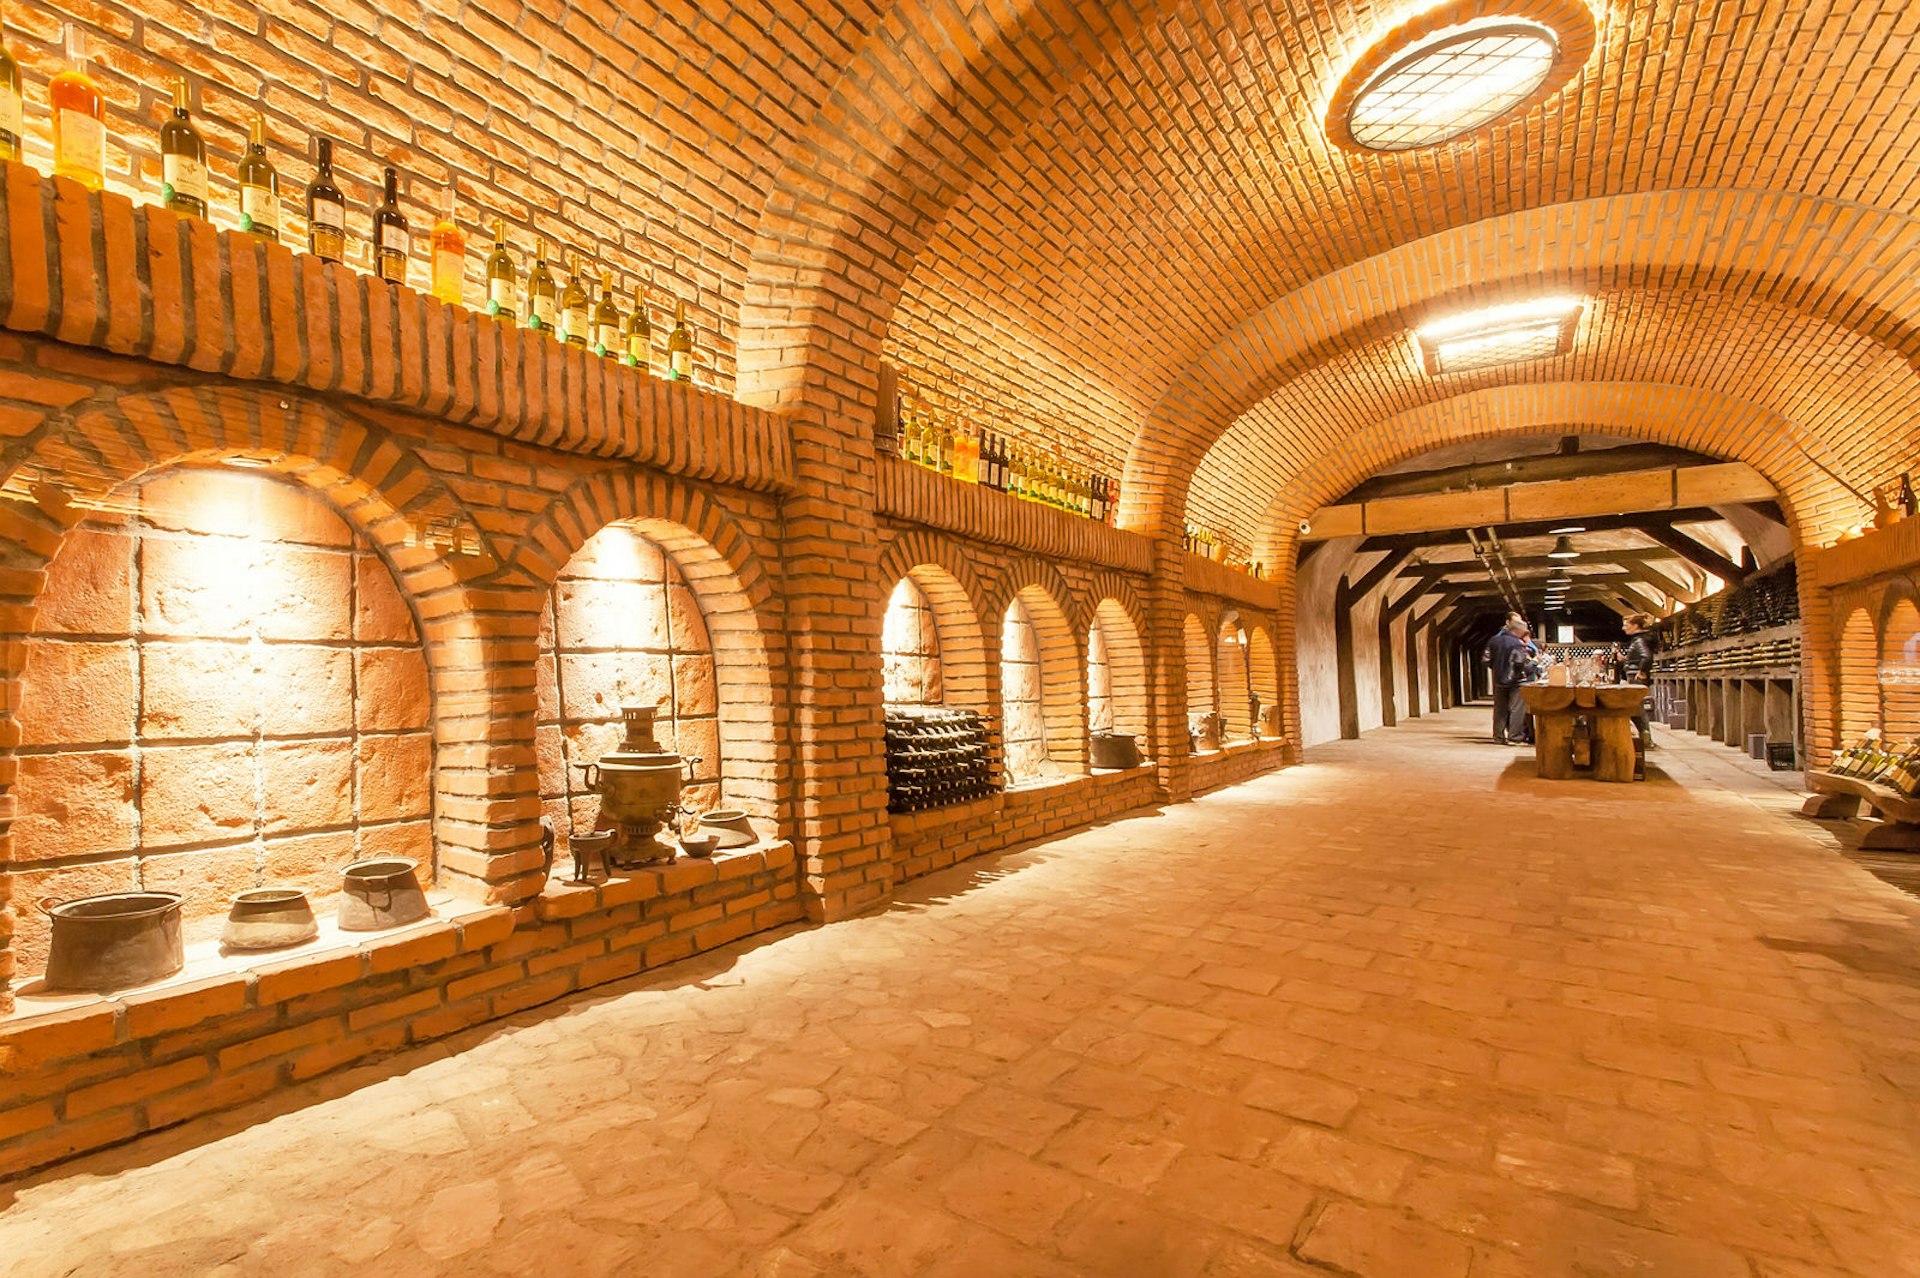 A well-lit tunnel with vintage wine-making equipment and wine bottles on display with a wine-tasting session taking place in the background at Winery Khareba, Georgia © Radiokafka / Shutterstock